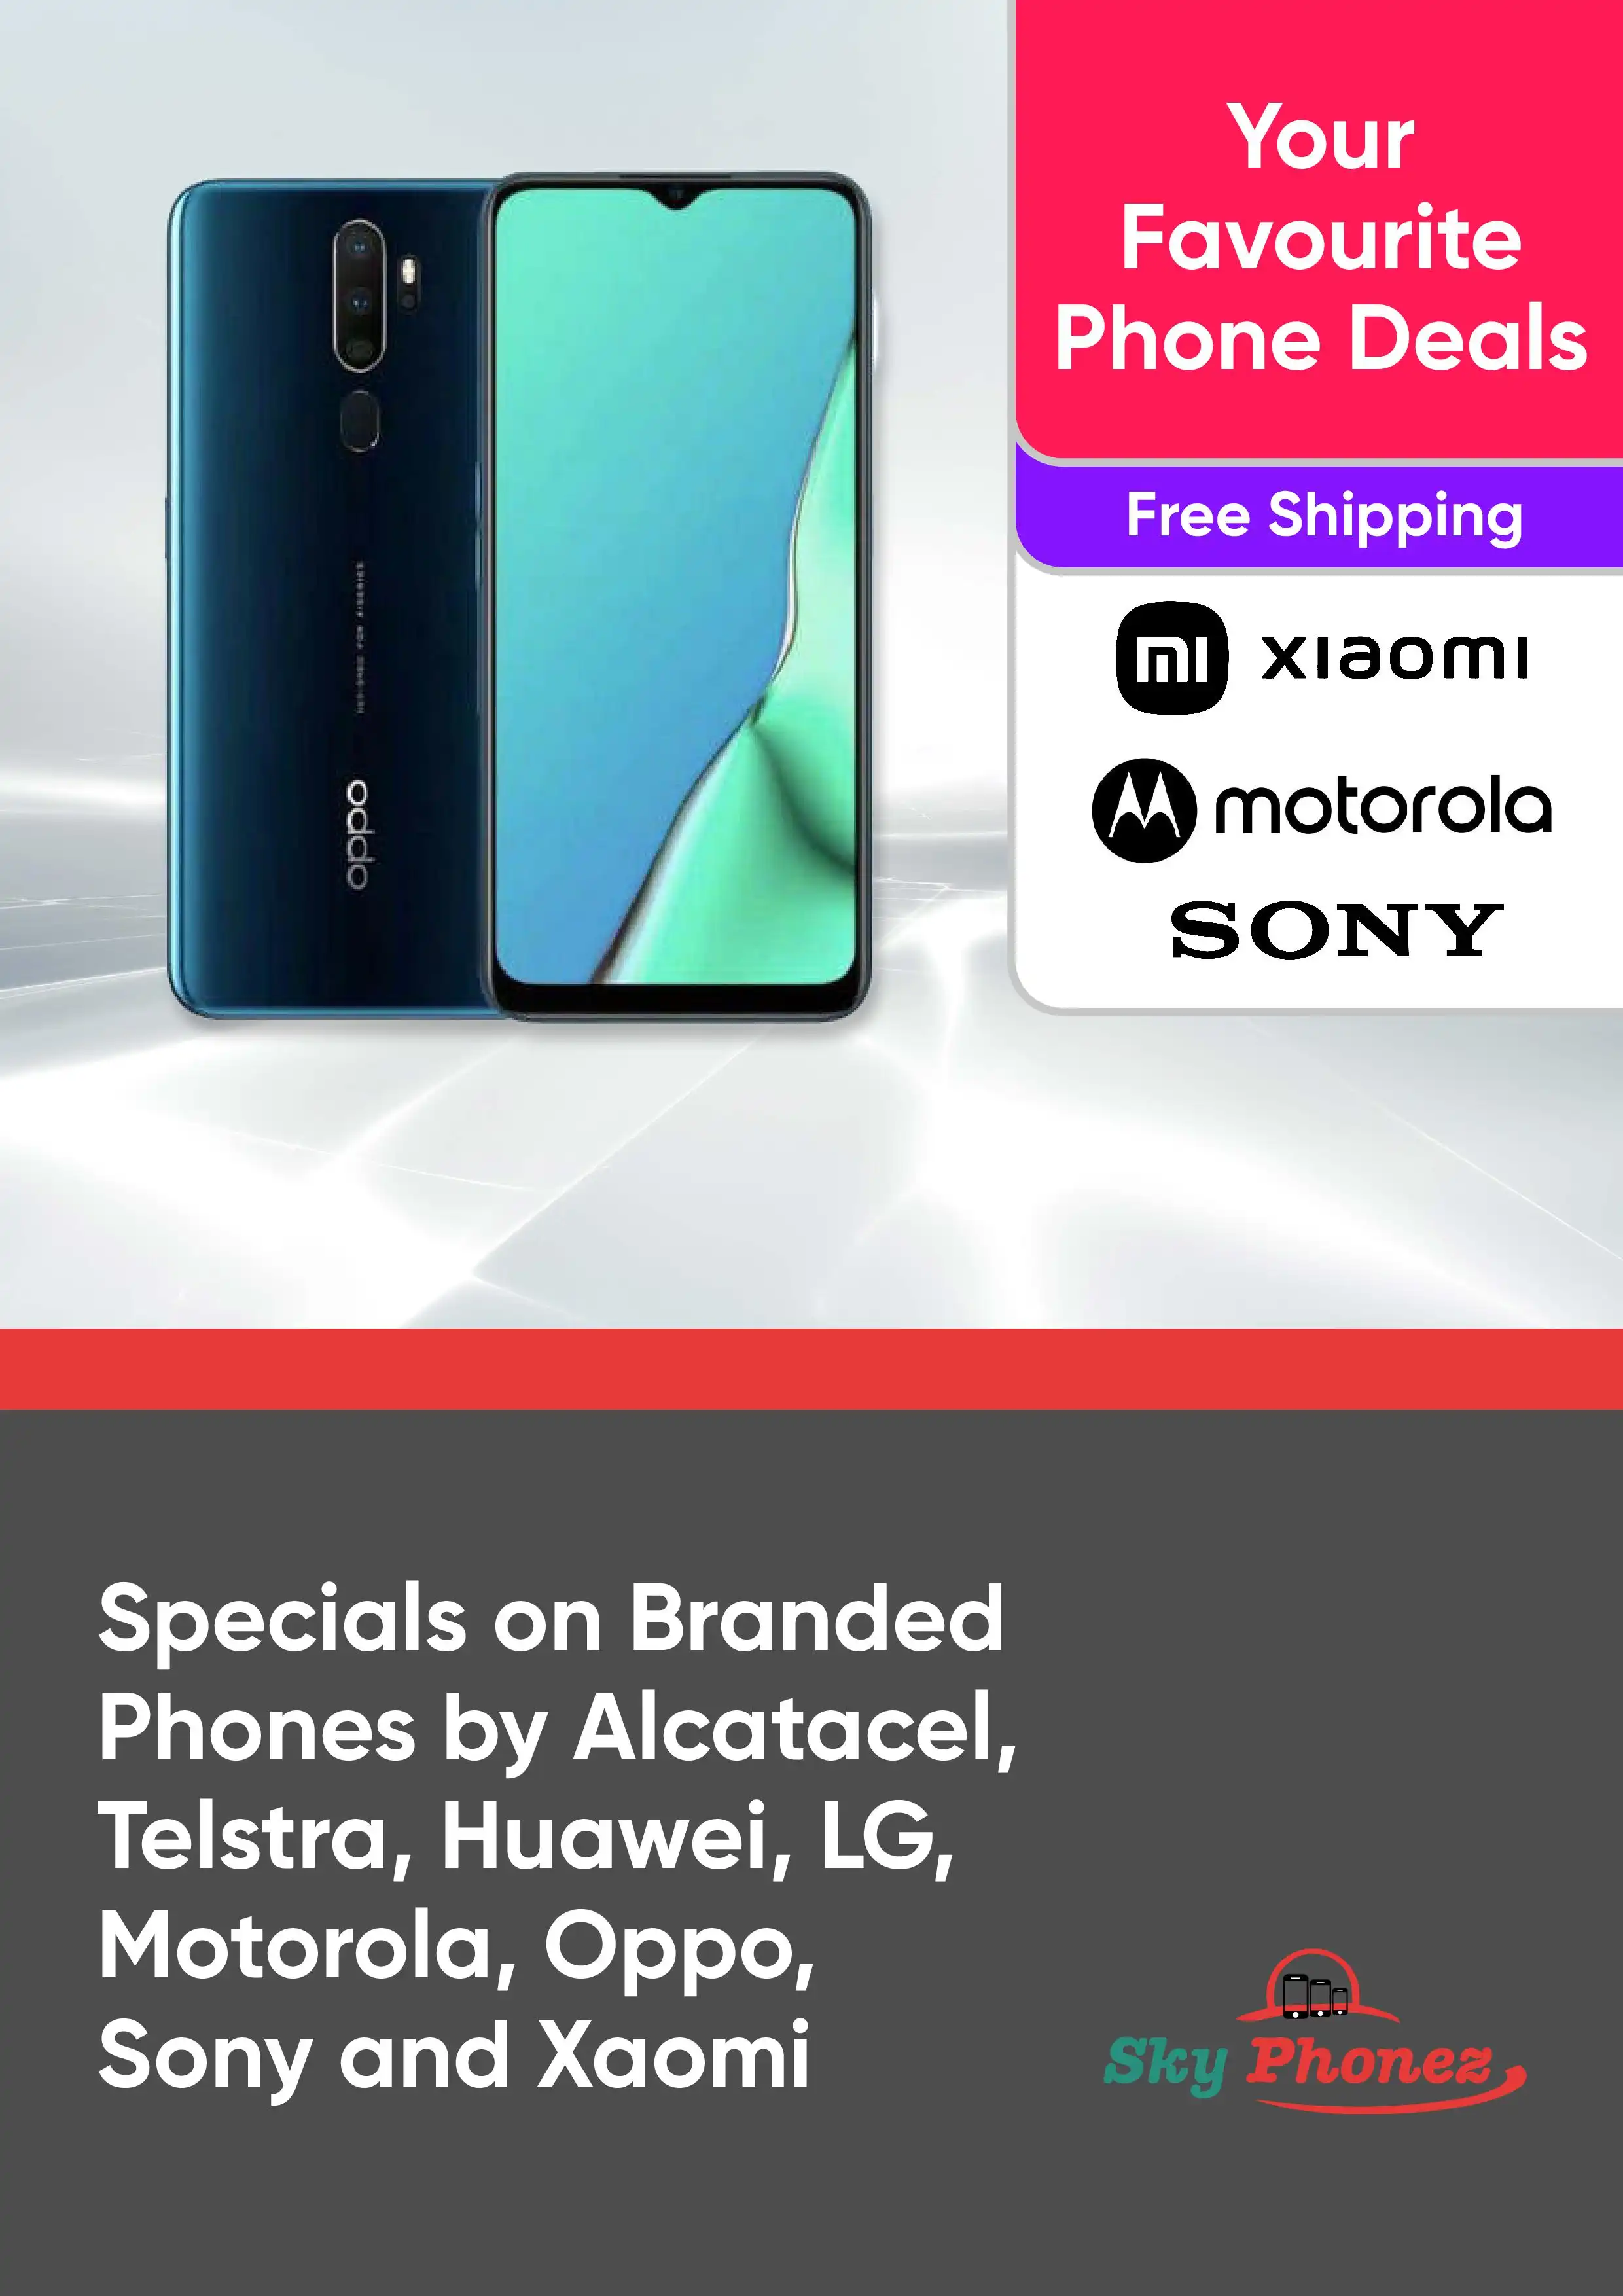 Specials on Branded Phones by Alcatacel, Telstra, Huawei, LG, Motorola, Oppo, Sony and Xiaomi 